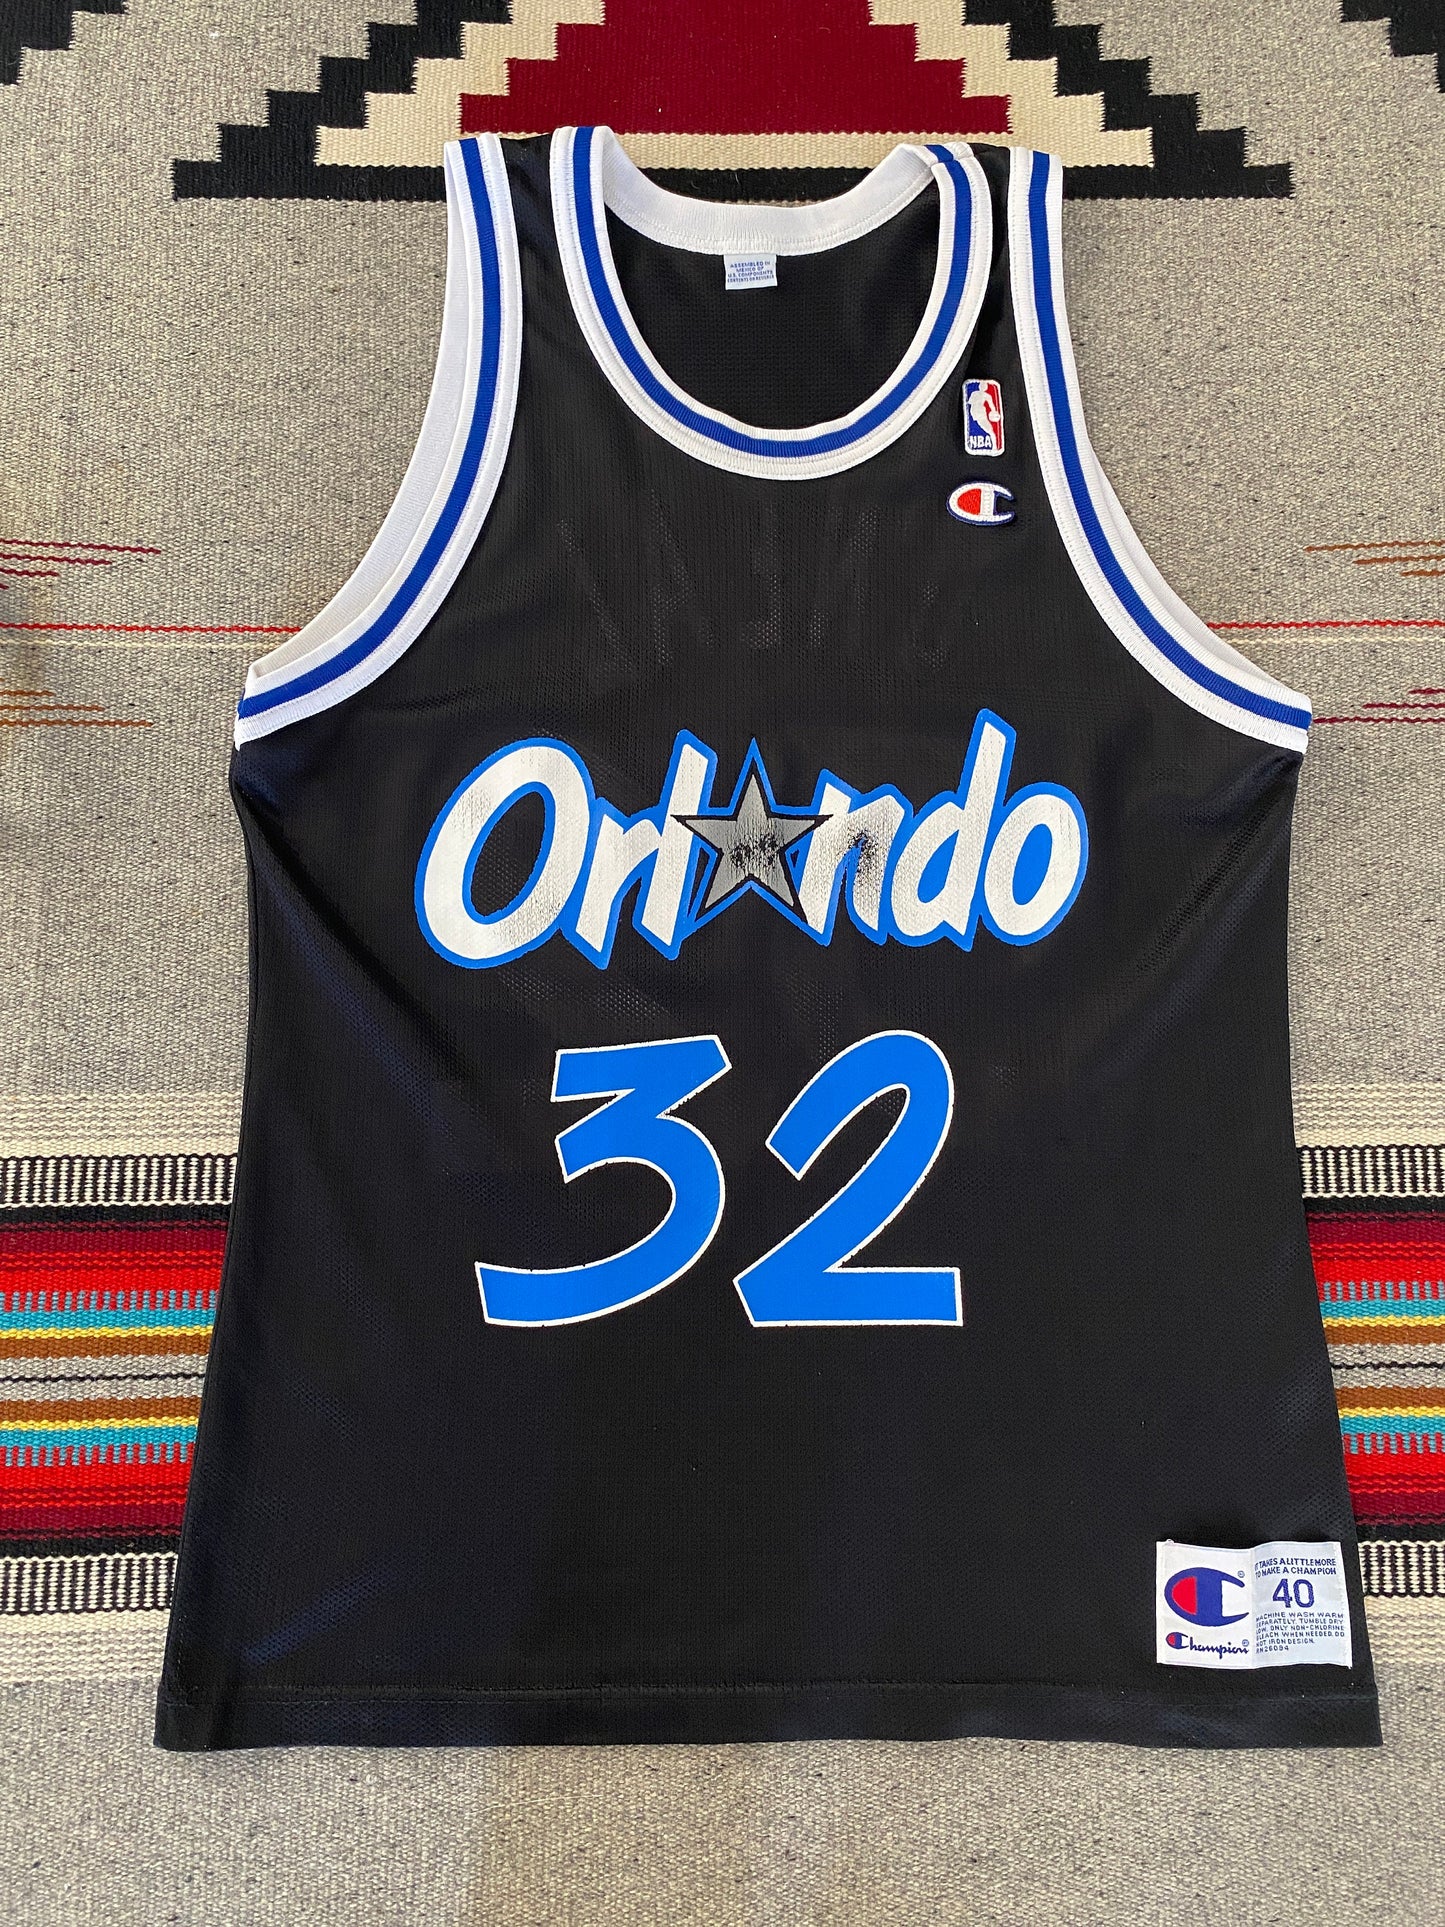 Authentic 90s Champion NBA Jersey - #32 O’Neal Orlando - Size 40